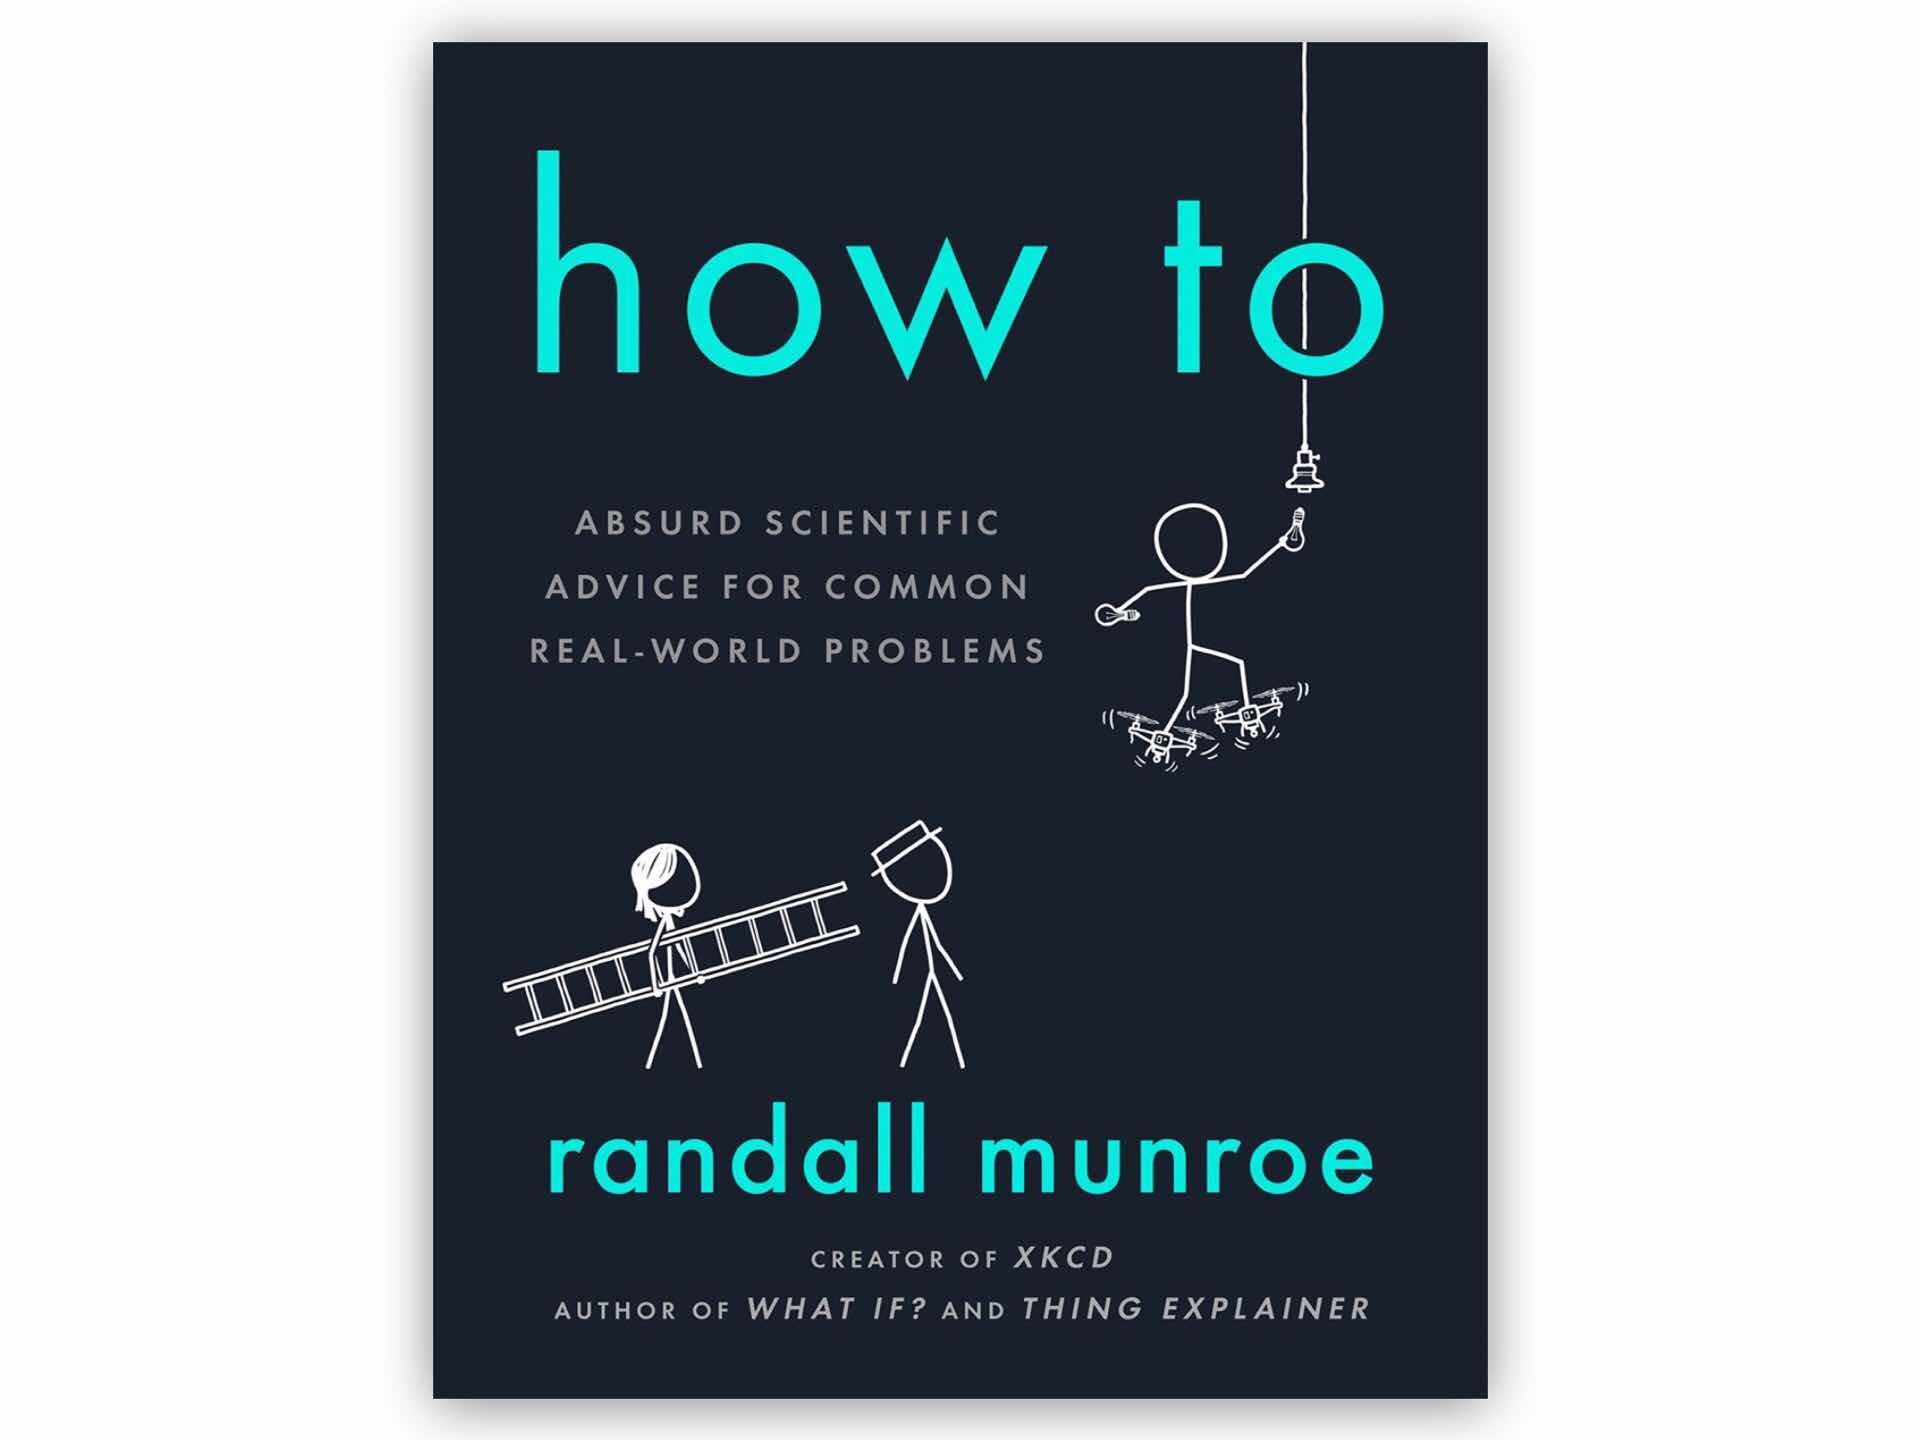 How To by xkcd's Randall Munroe. ($17 hardcover)